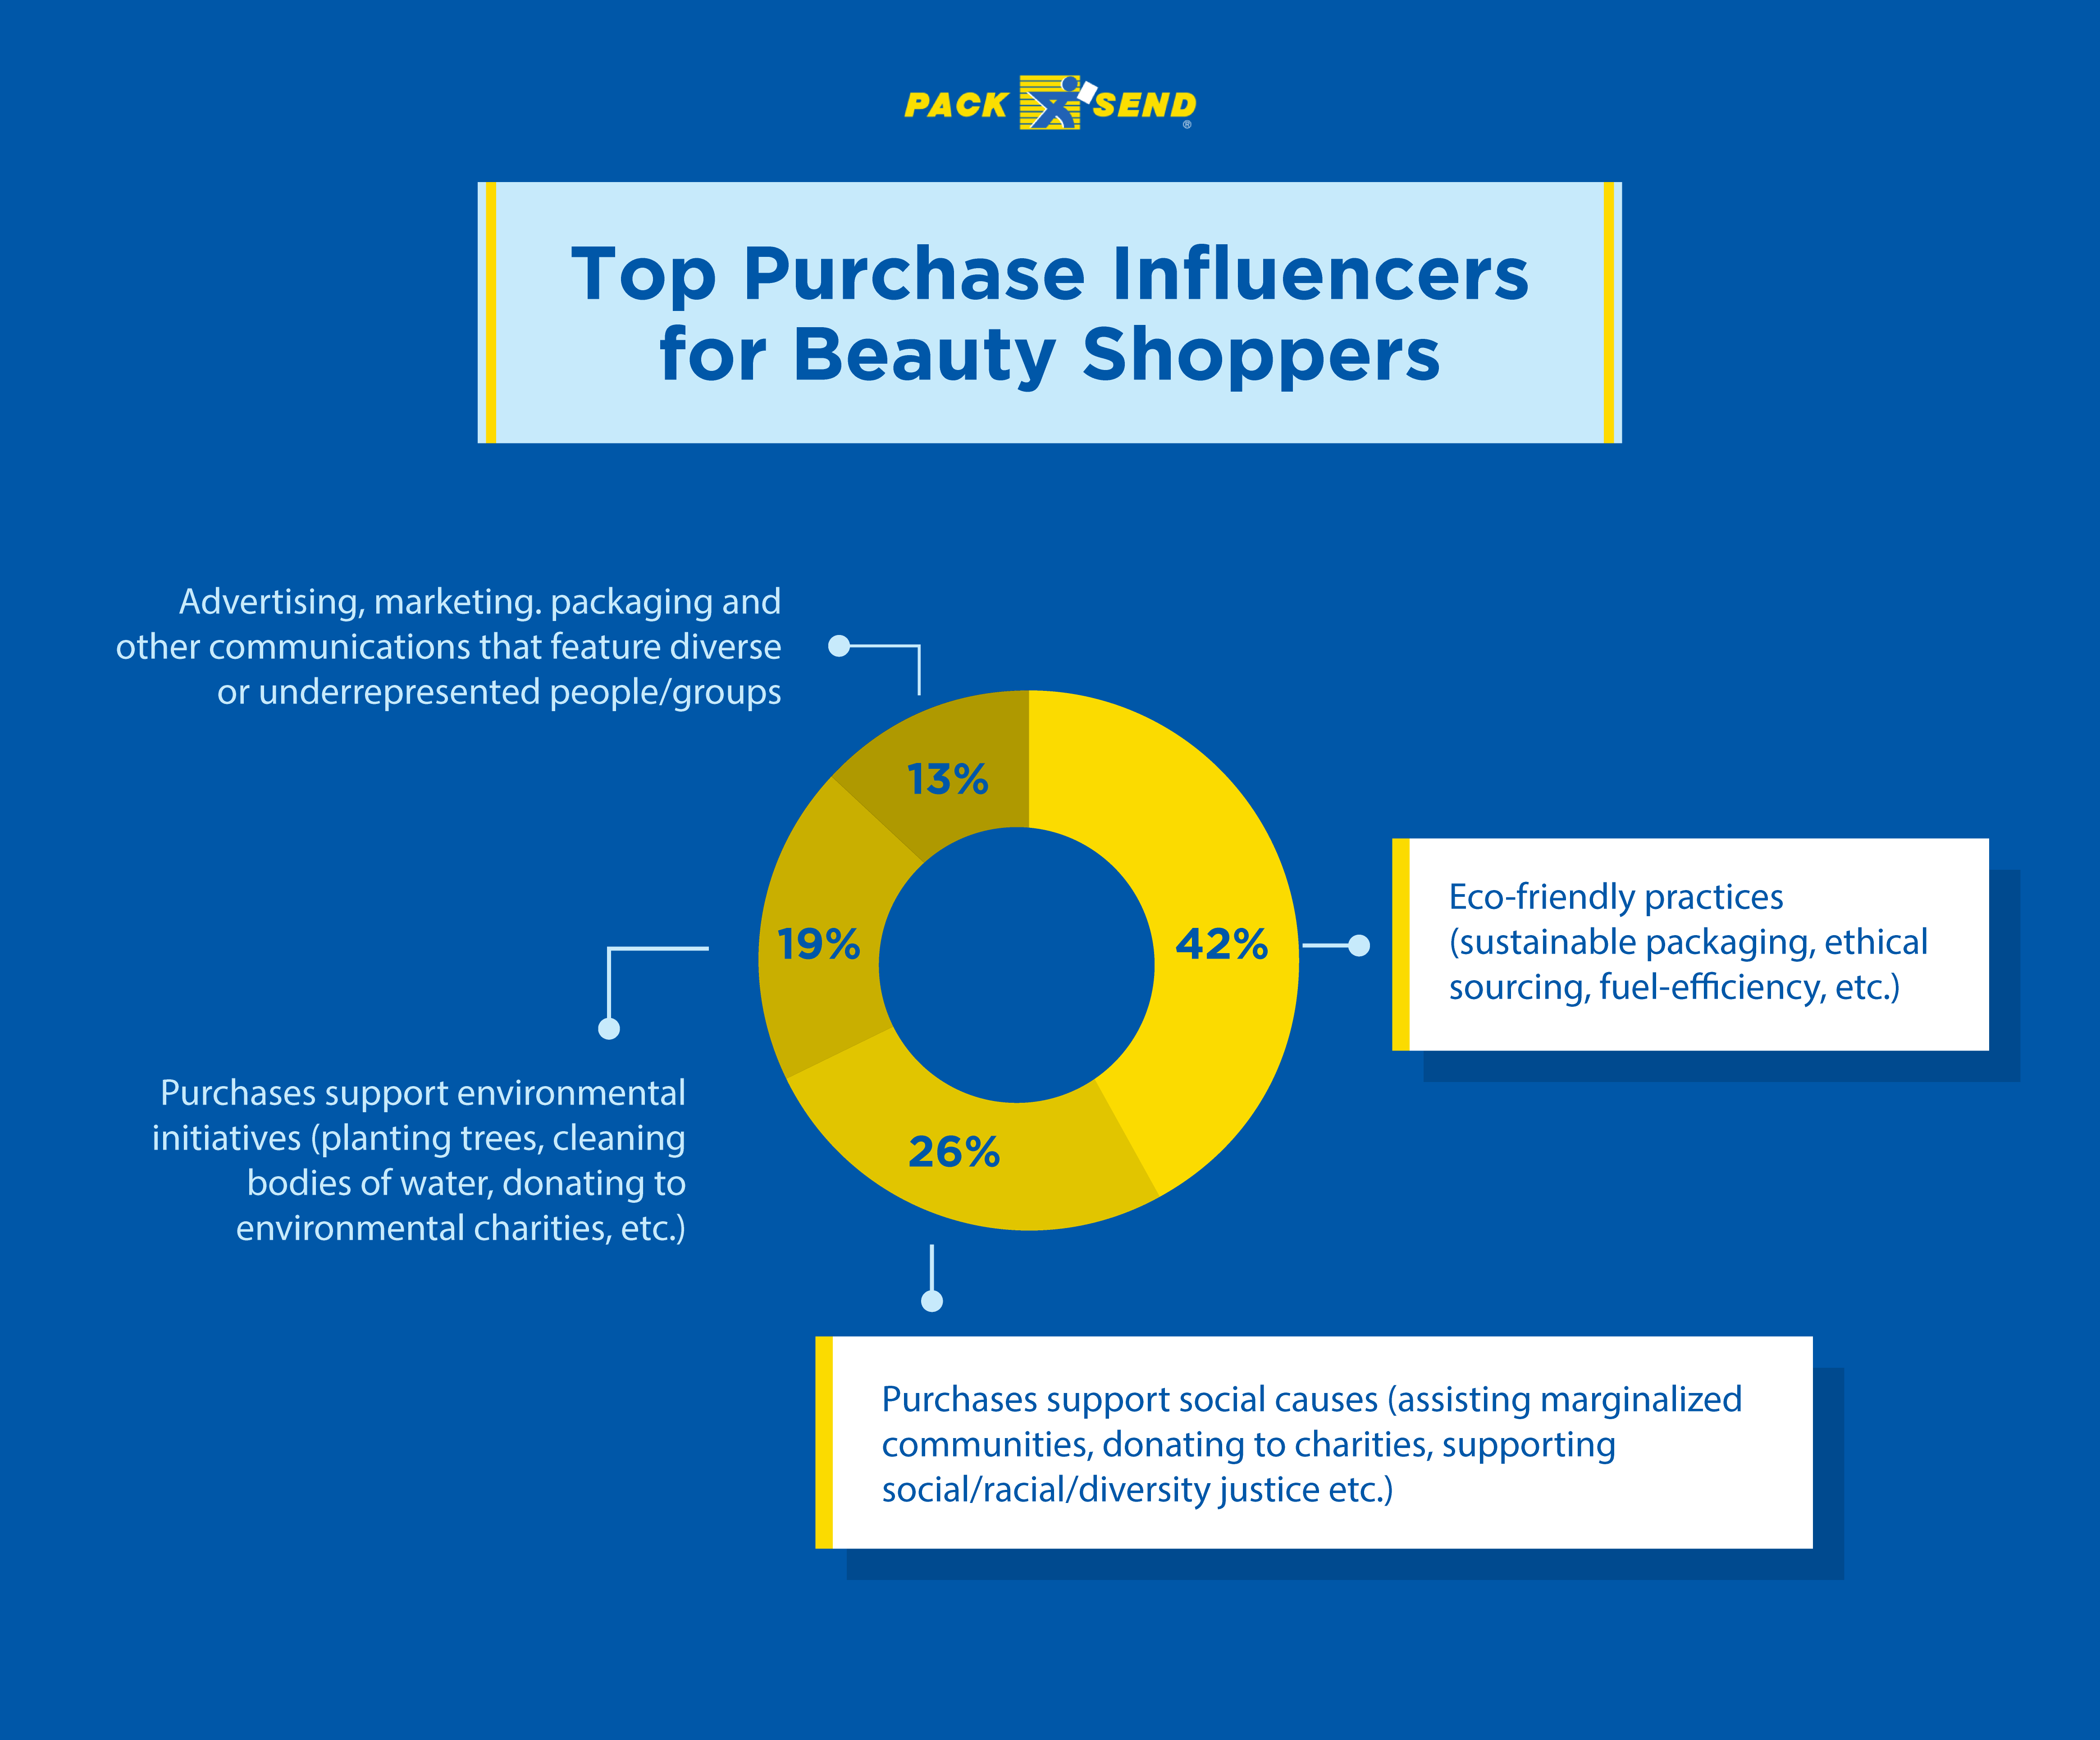 Top purchase influencers for beauty shoppers